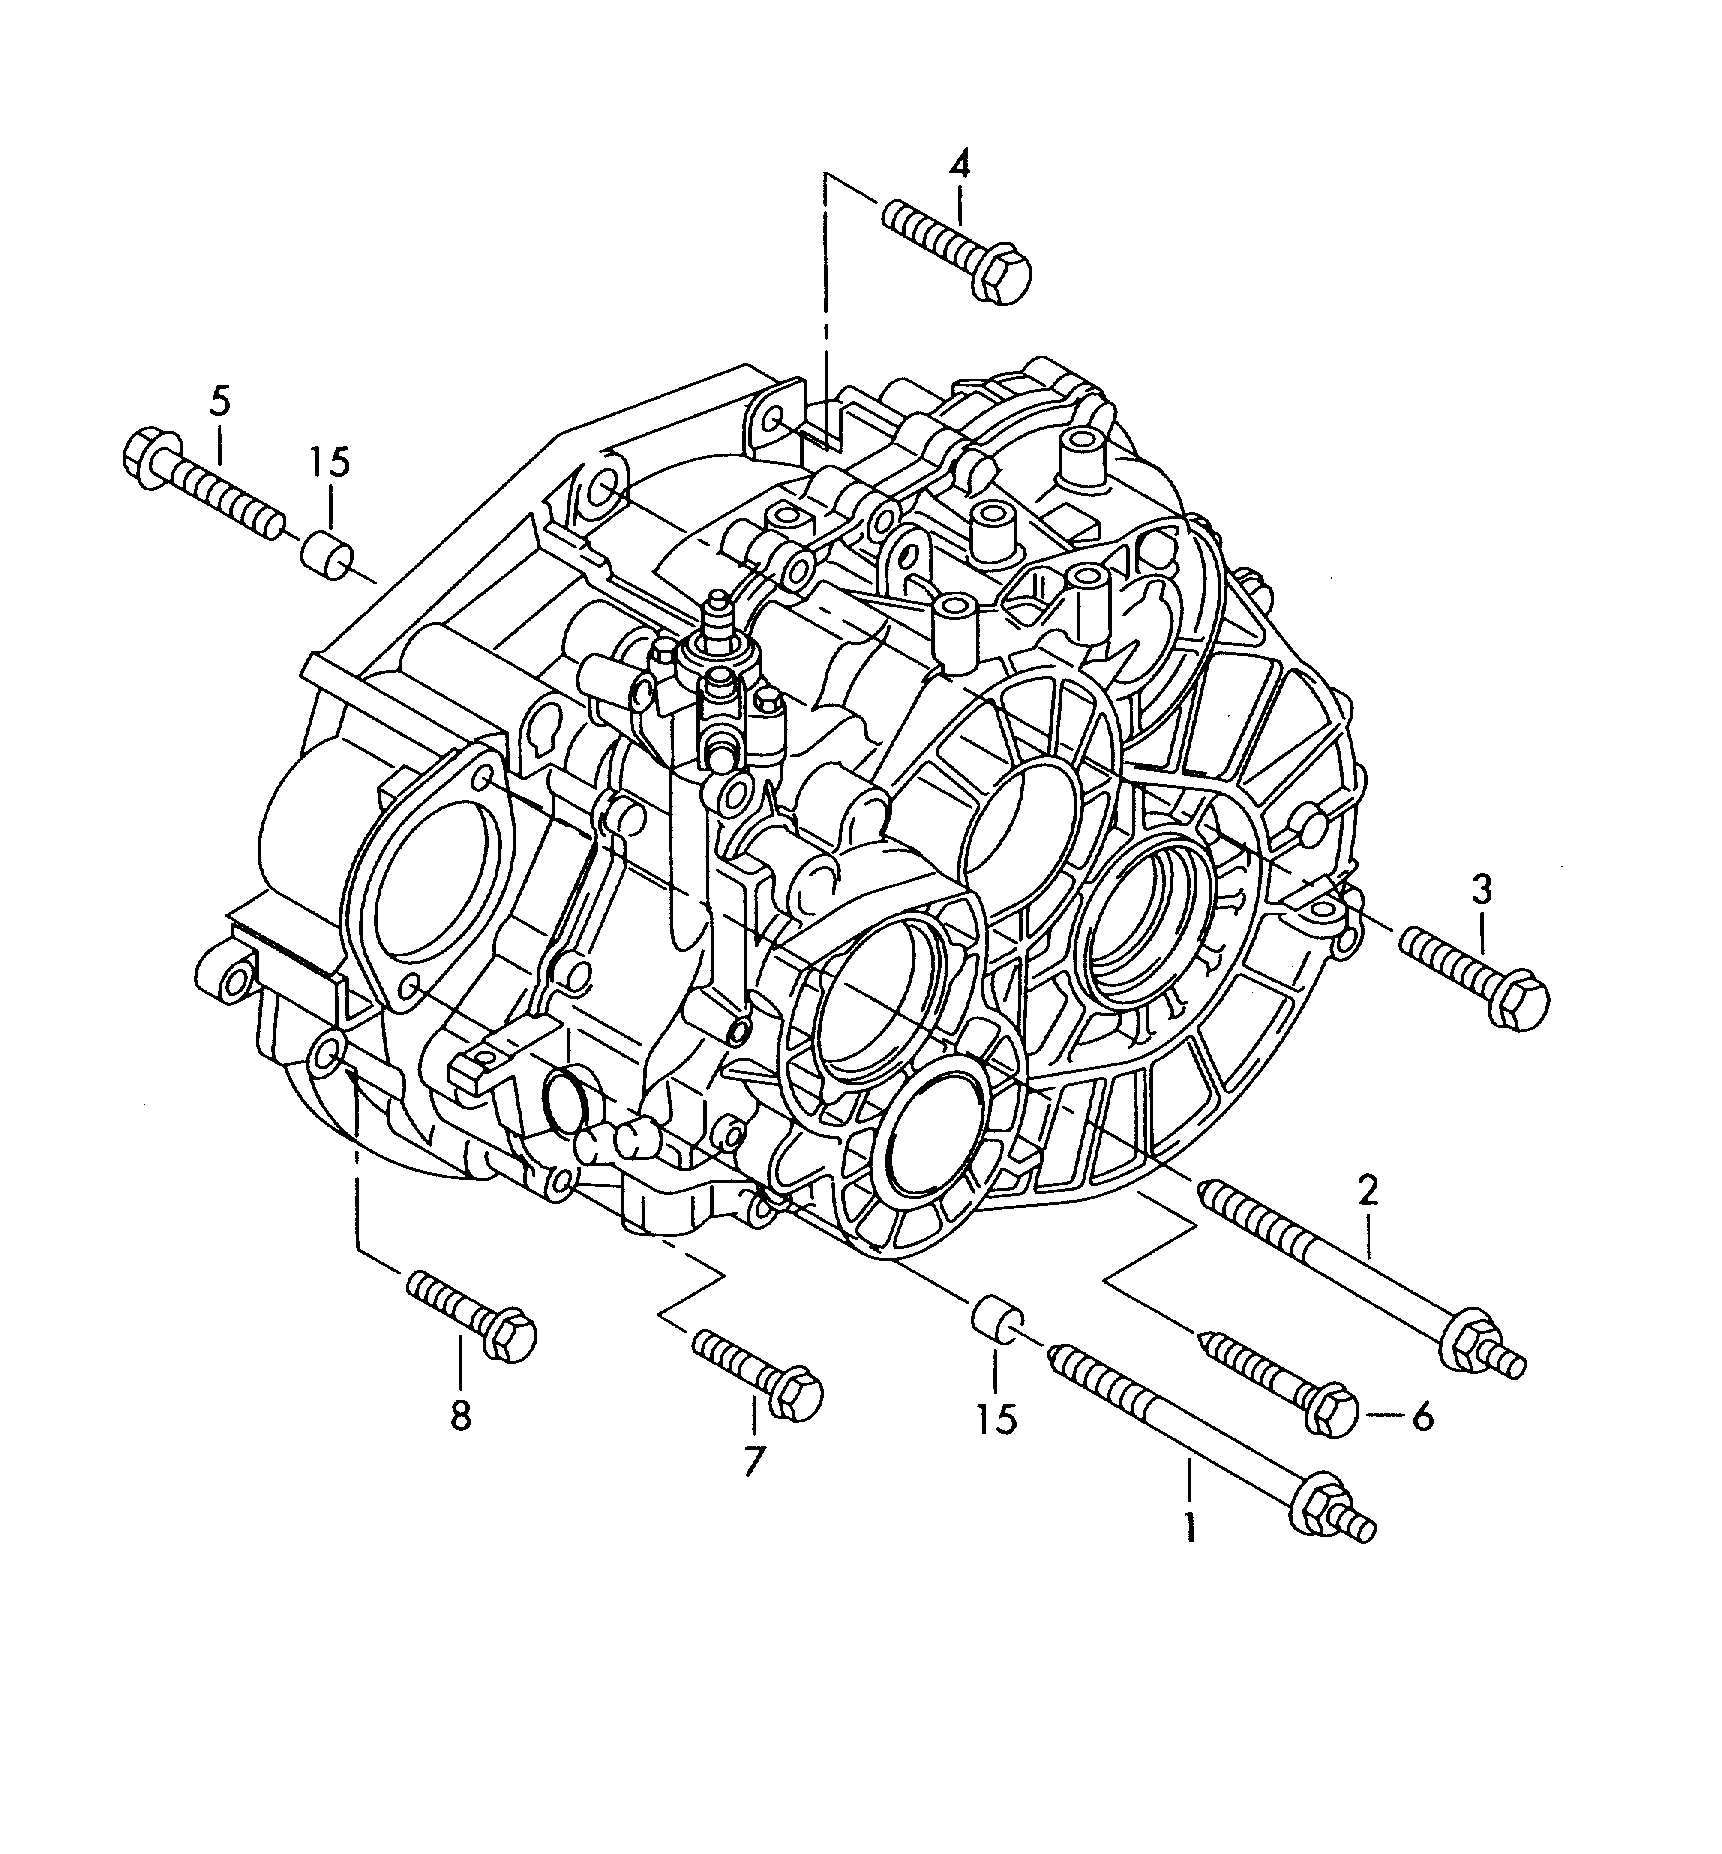 mounting parts for engine and<br>transmission6-speed manual transmissionfor four-wheel drive 2.0 Ltr.<br> MQ500 - Tiguan - tig